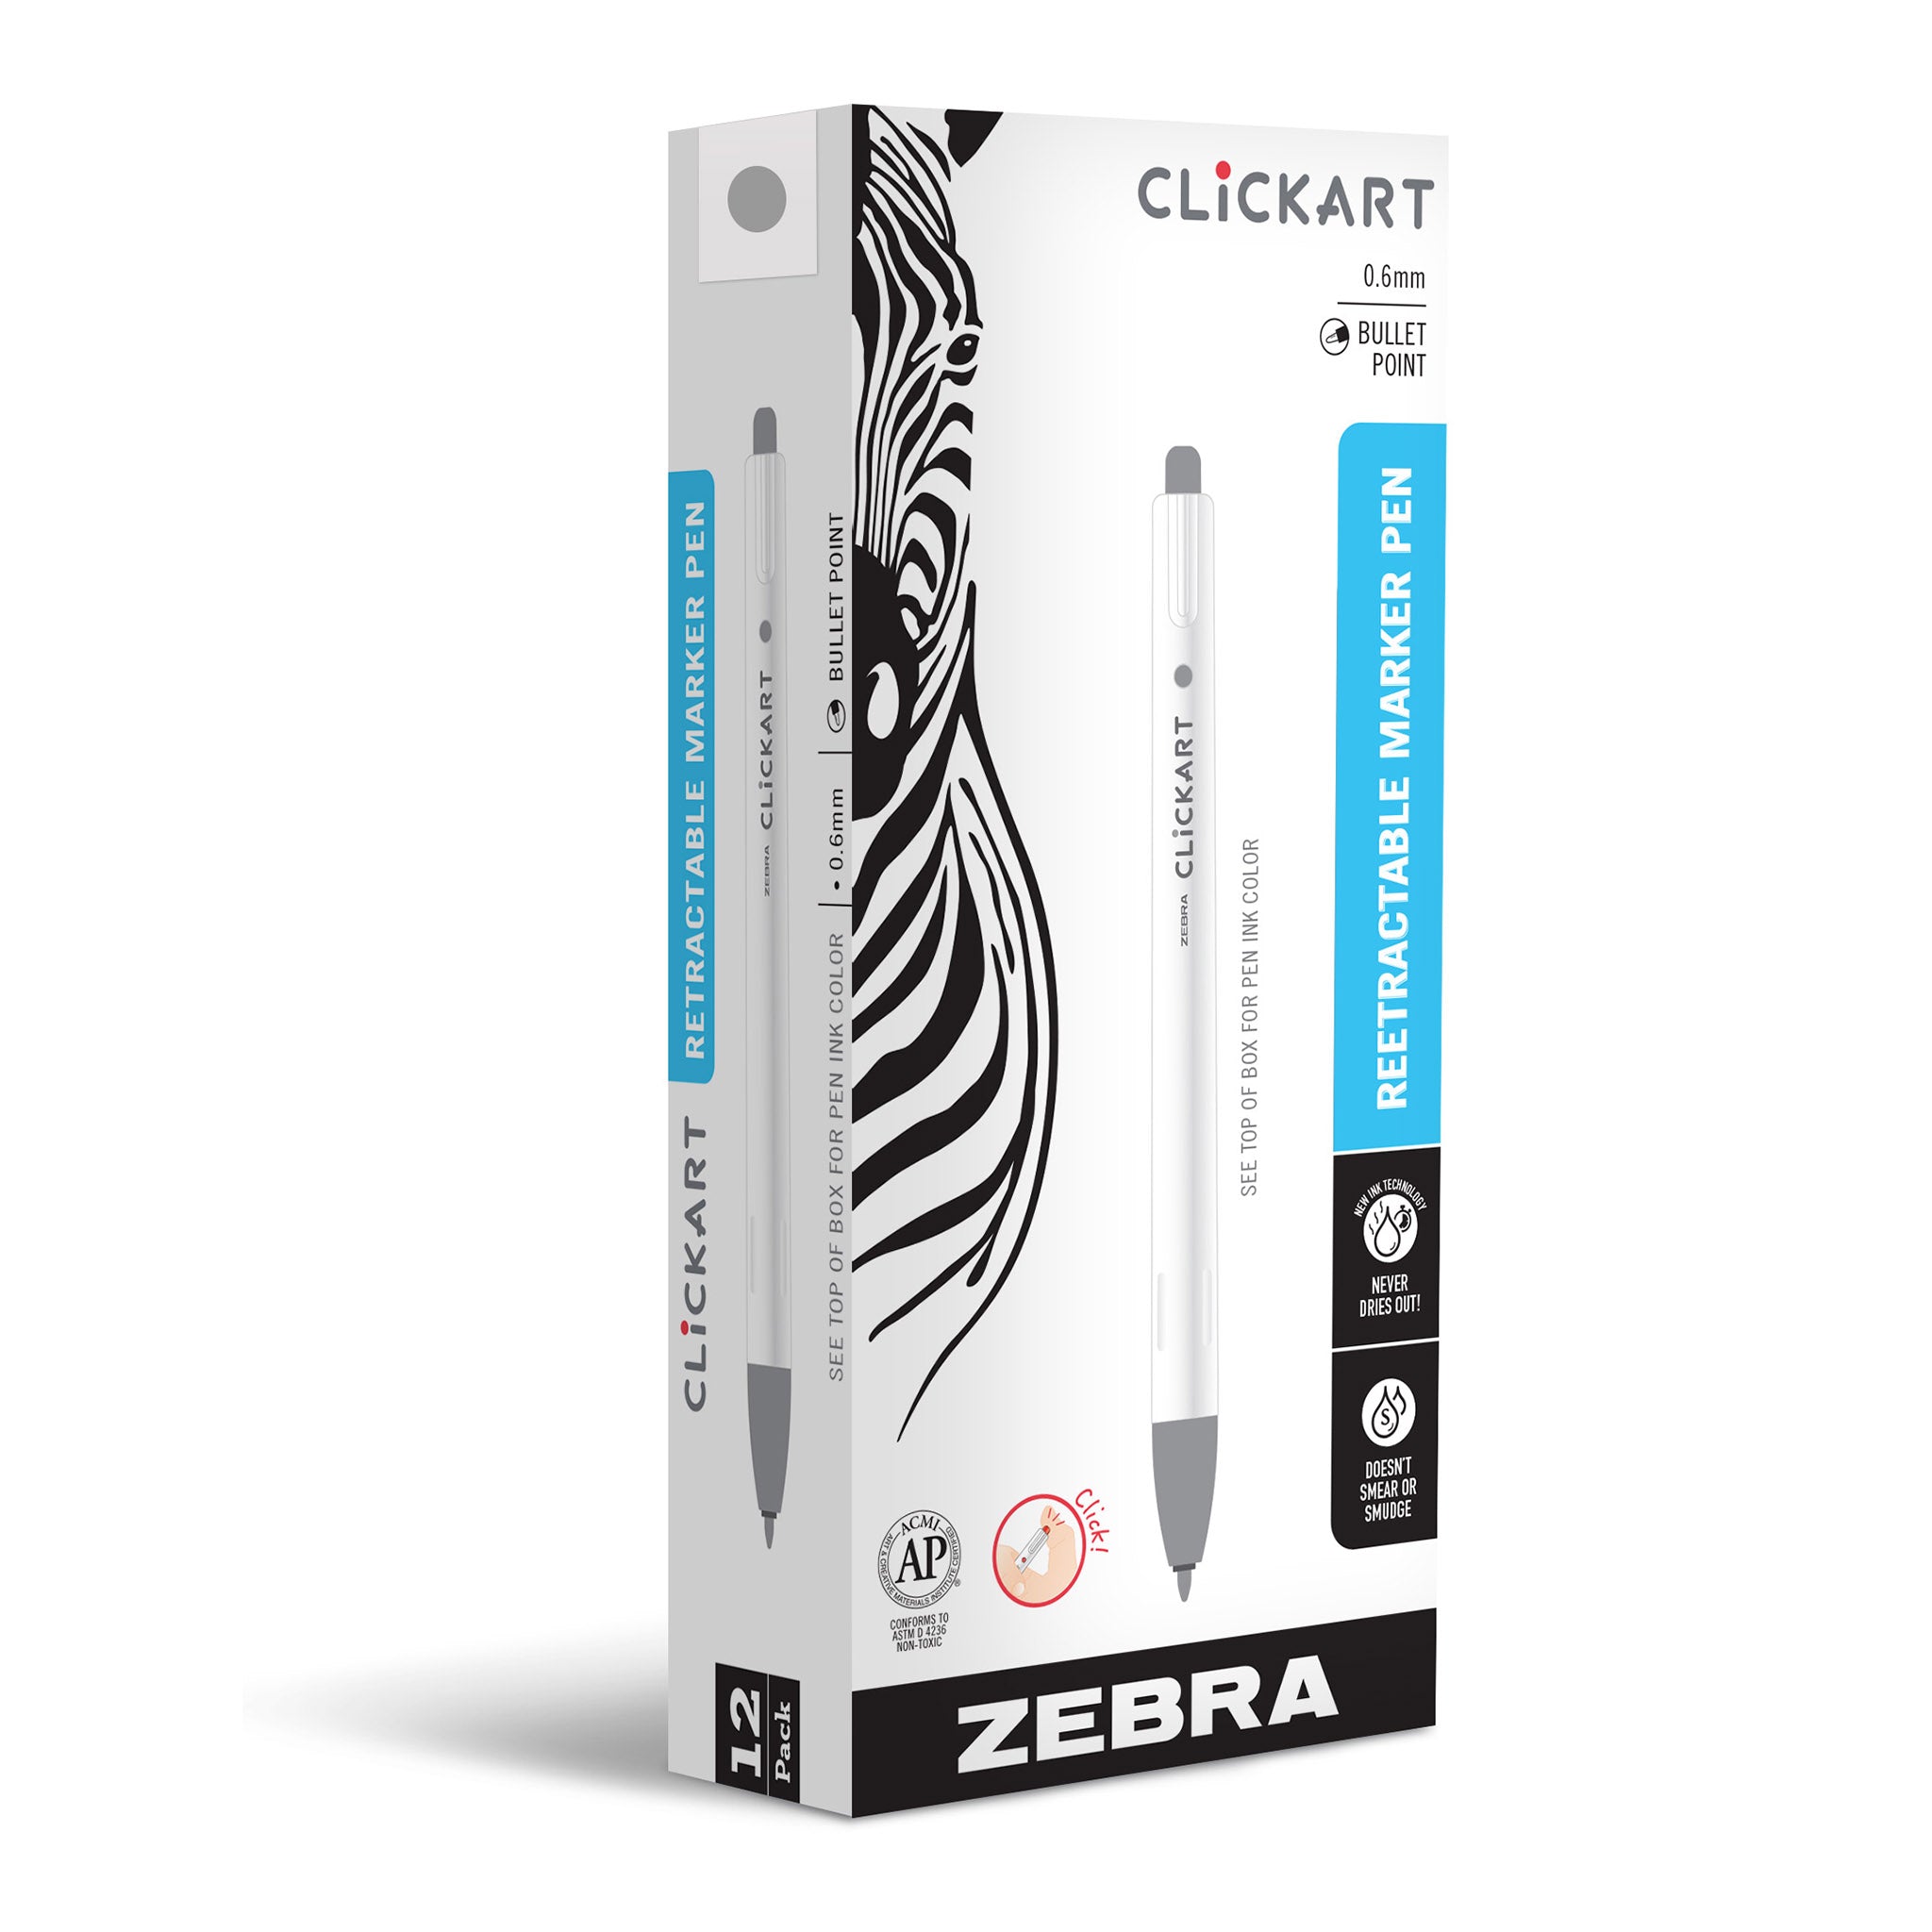 I only journaled in pen or pencil and after awhile, I thought it got kind  of boring lol. I came across these Clickart retractable marker pens that I  recommend. Especially if you